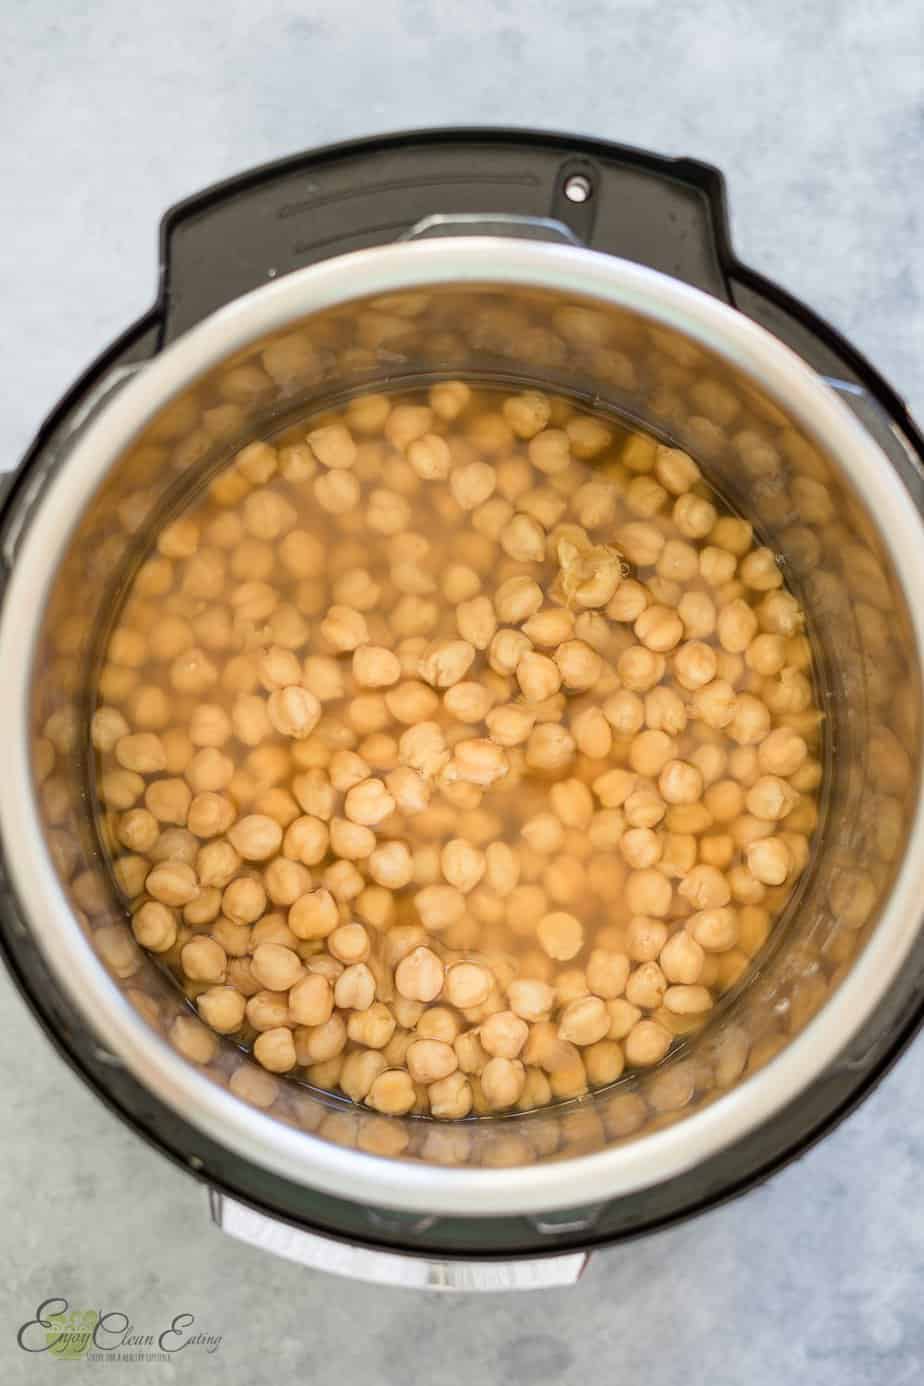 fully cooked chickpeas inside the instant pot pressure cooker